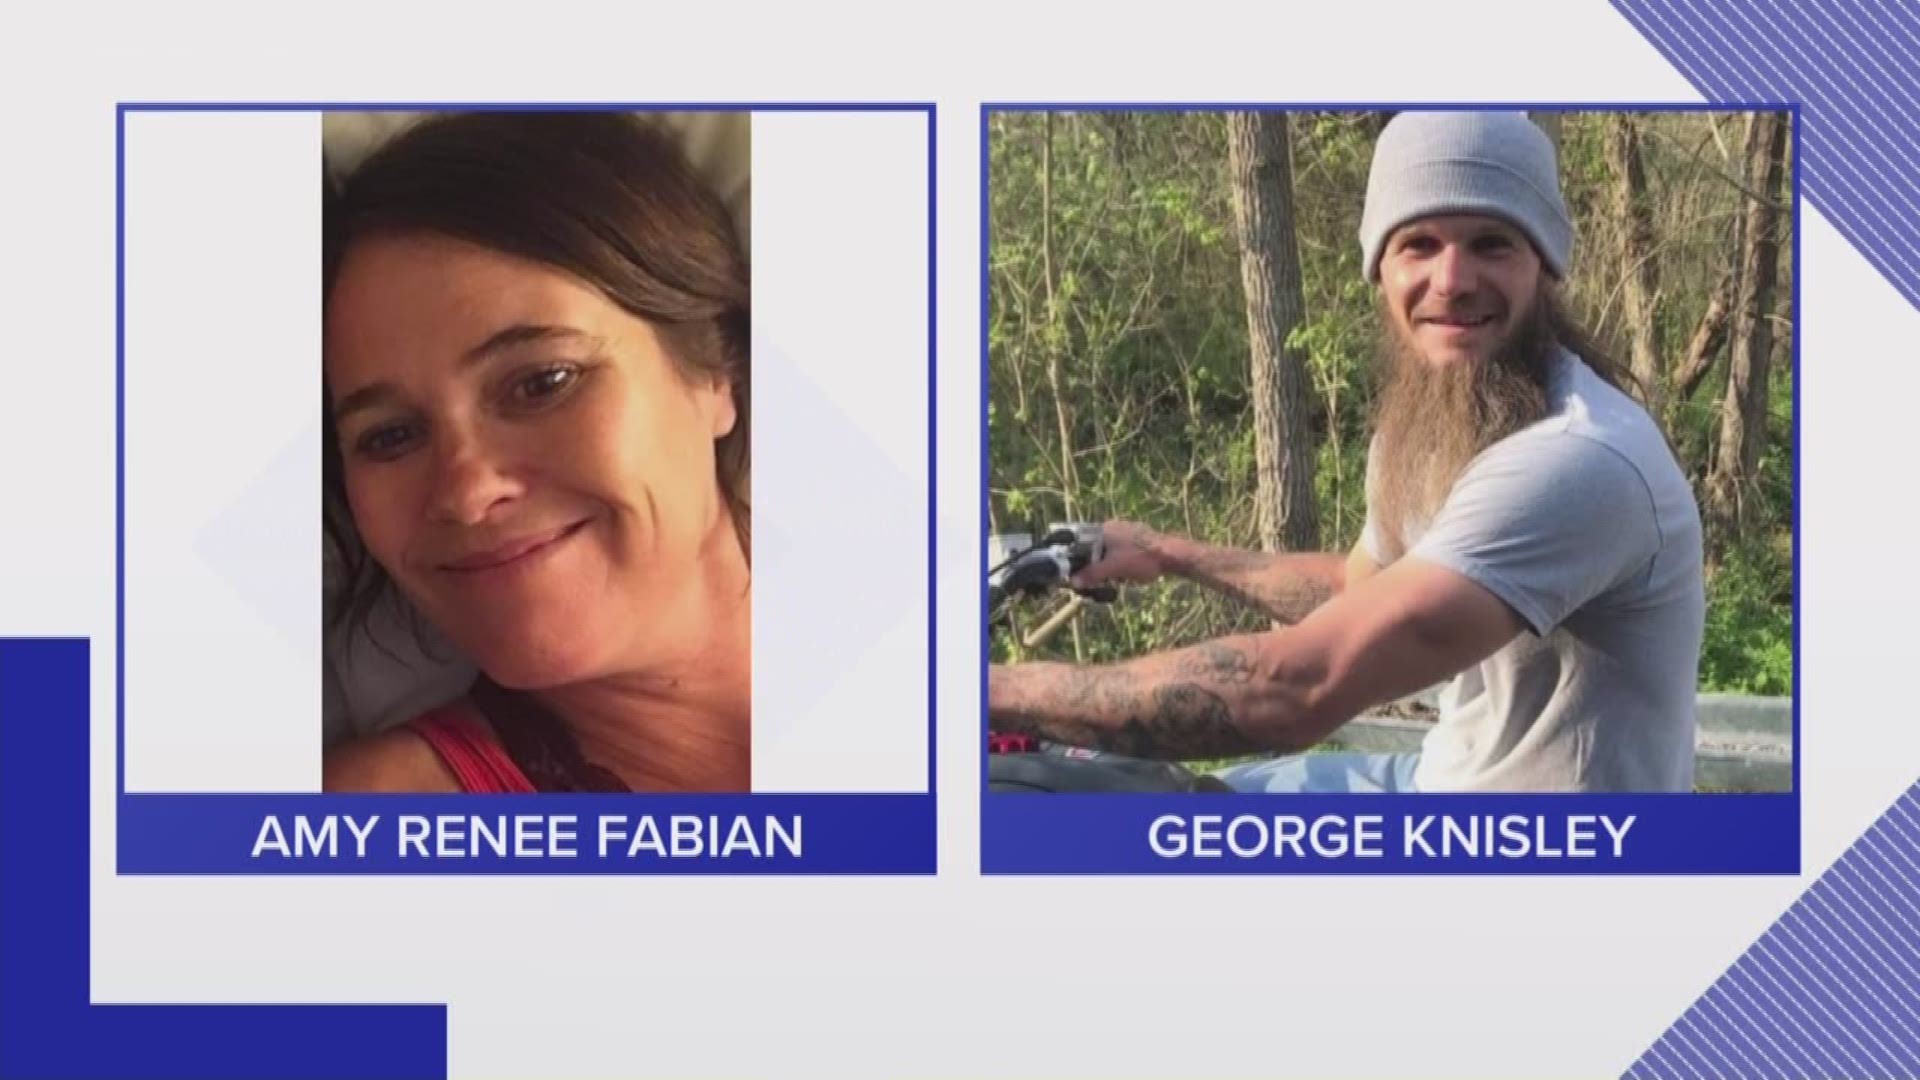 Amy Fabian was last seen in Cumberland, Virginia. Police believe she was abducted by George Knisley.